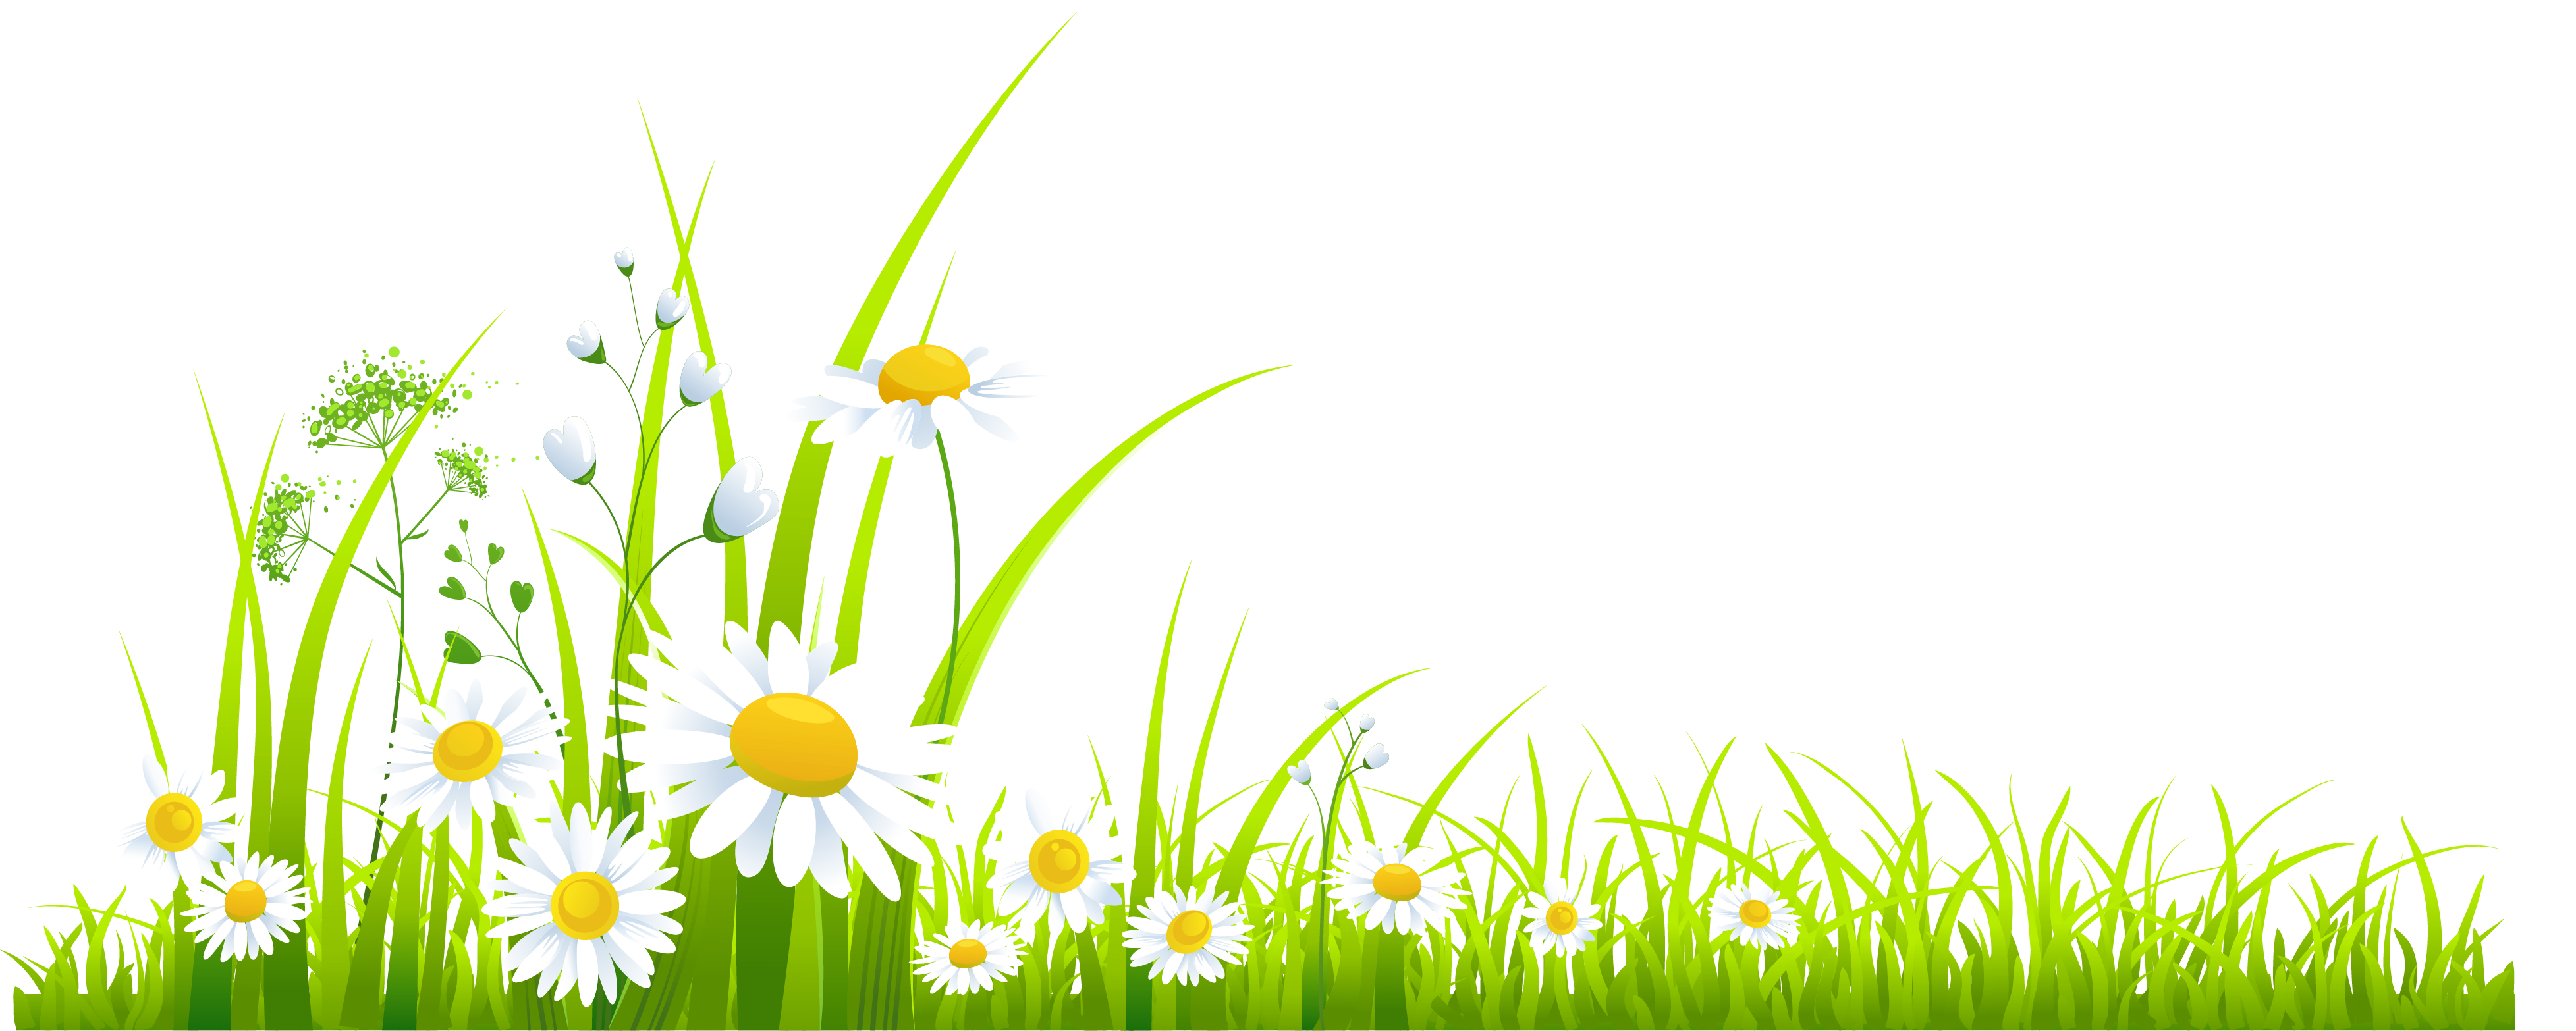 spring image clipart - photo #45